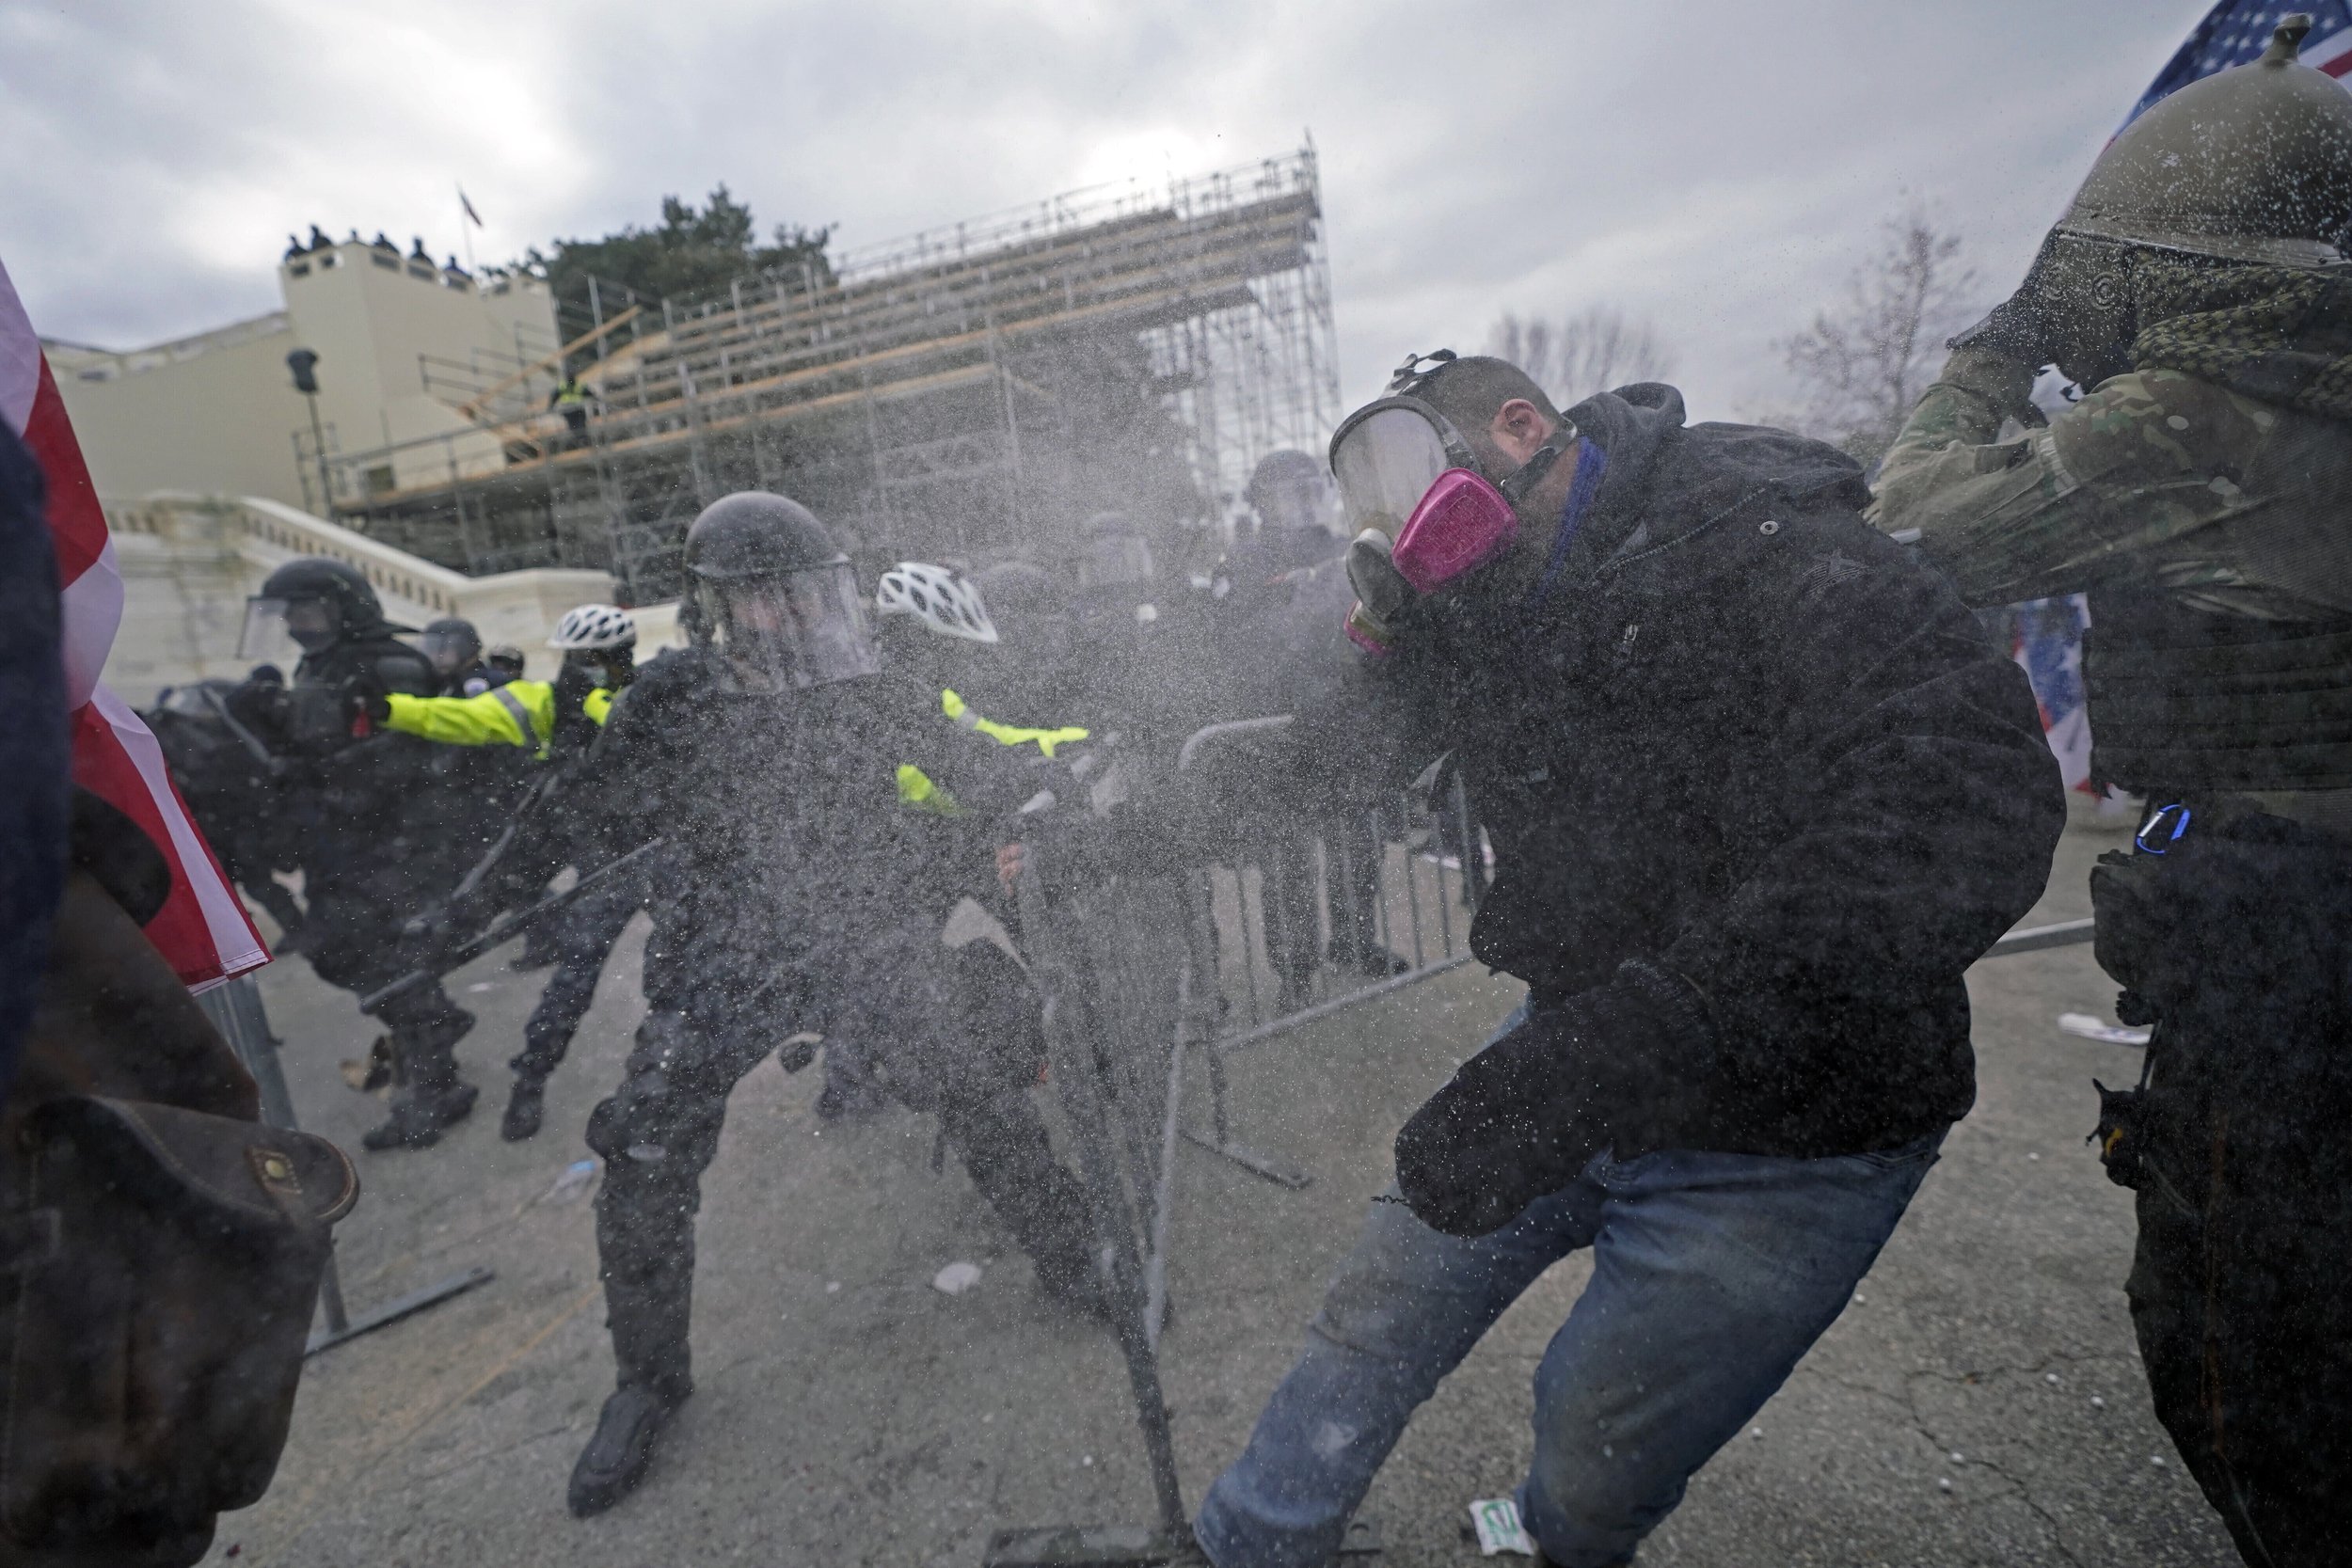  Supporters of President Donald Trump try to break through a police barrier at the Capitol in Washington on Jan. 6, 2021, as Congress prepared to affirm President-elect Joe Biden's victory. (AP Photo/Julio Cortez) 